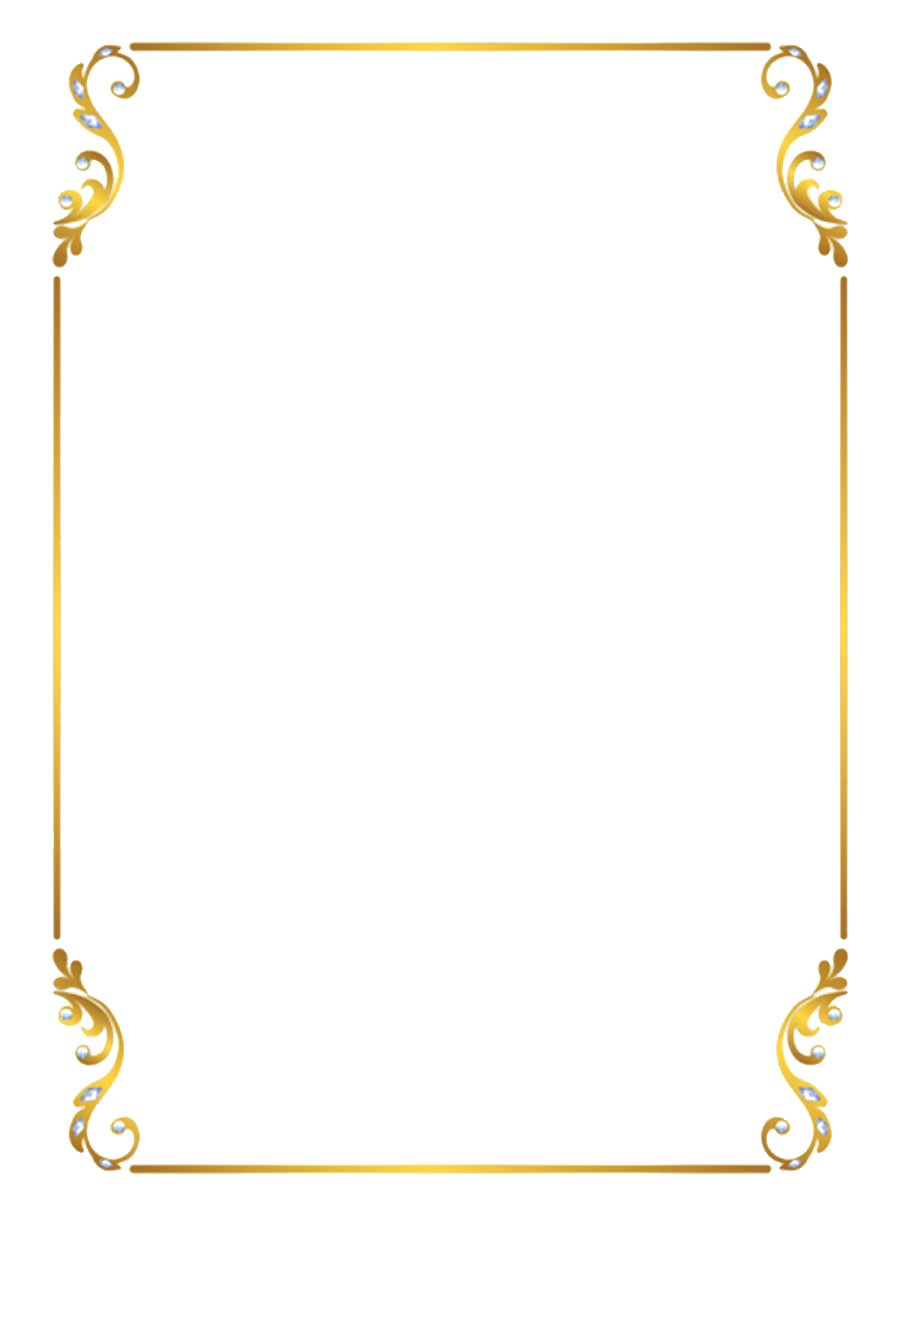 Golden Border PNG Free Download | PNG All